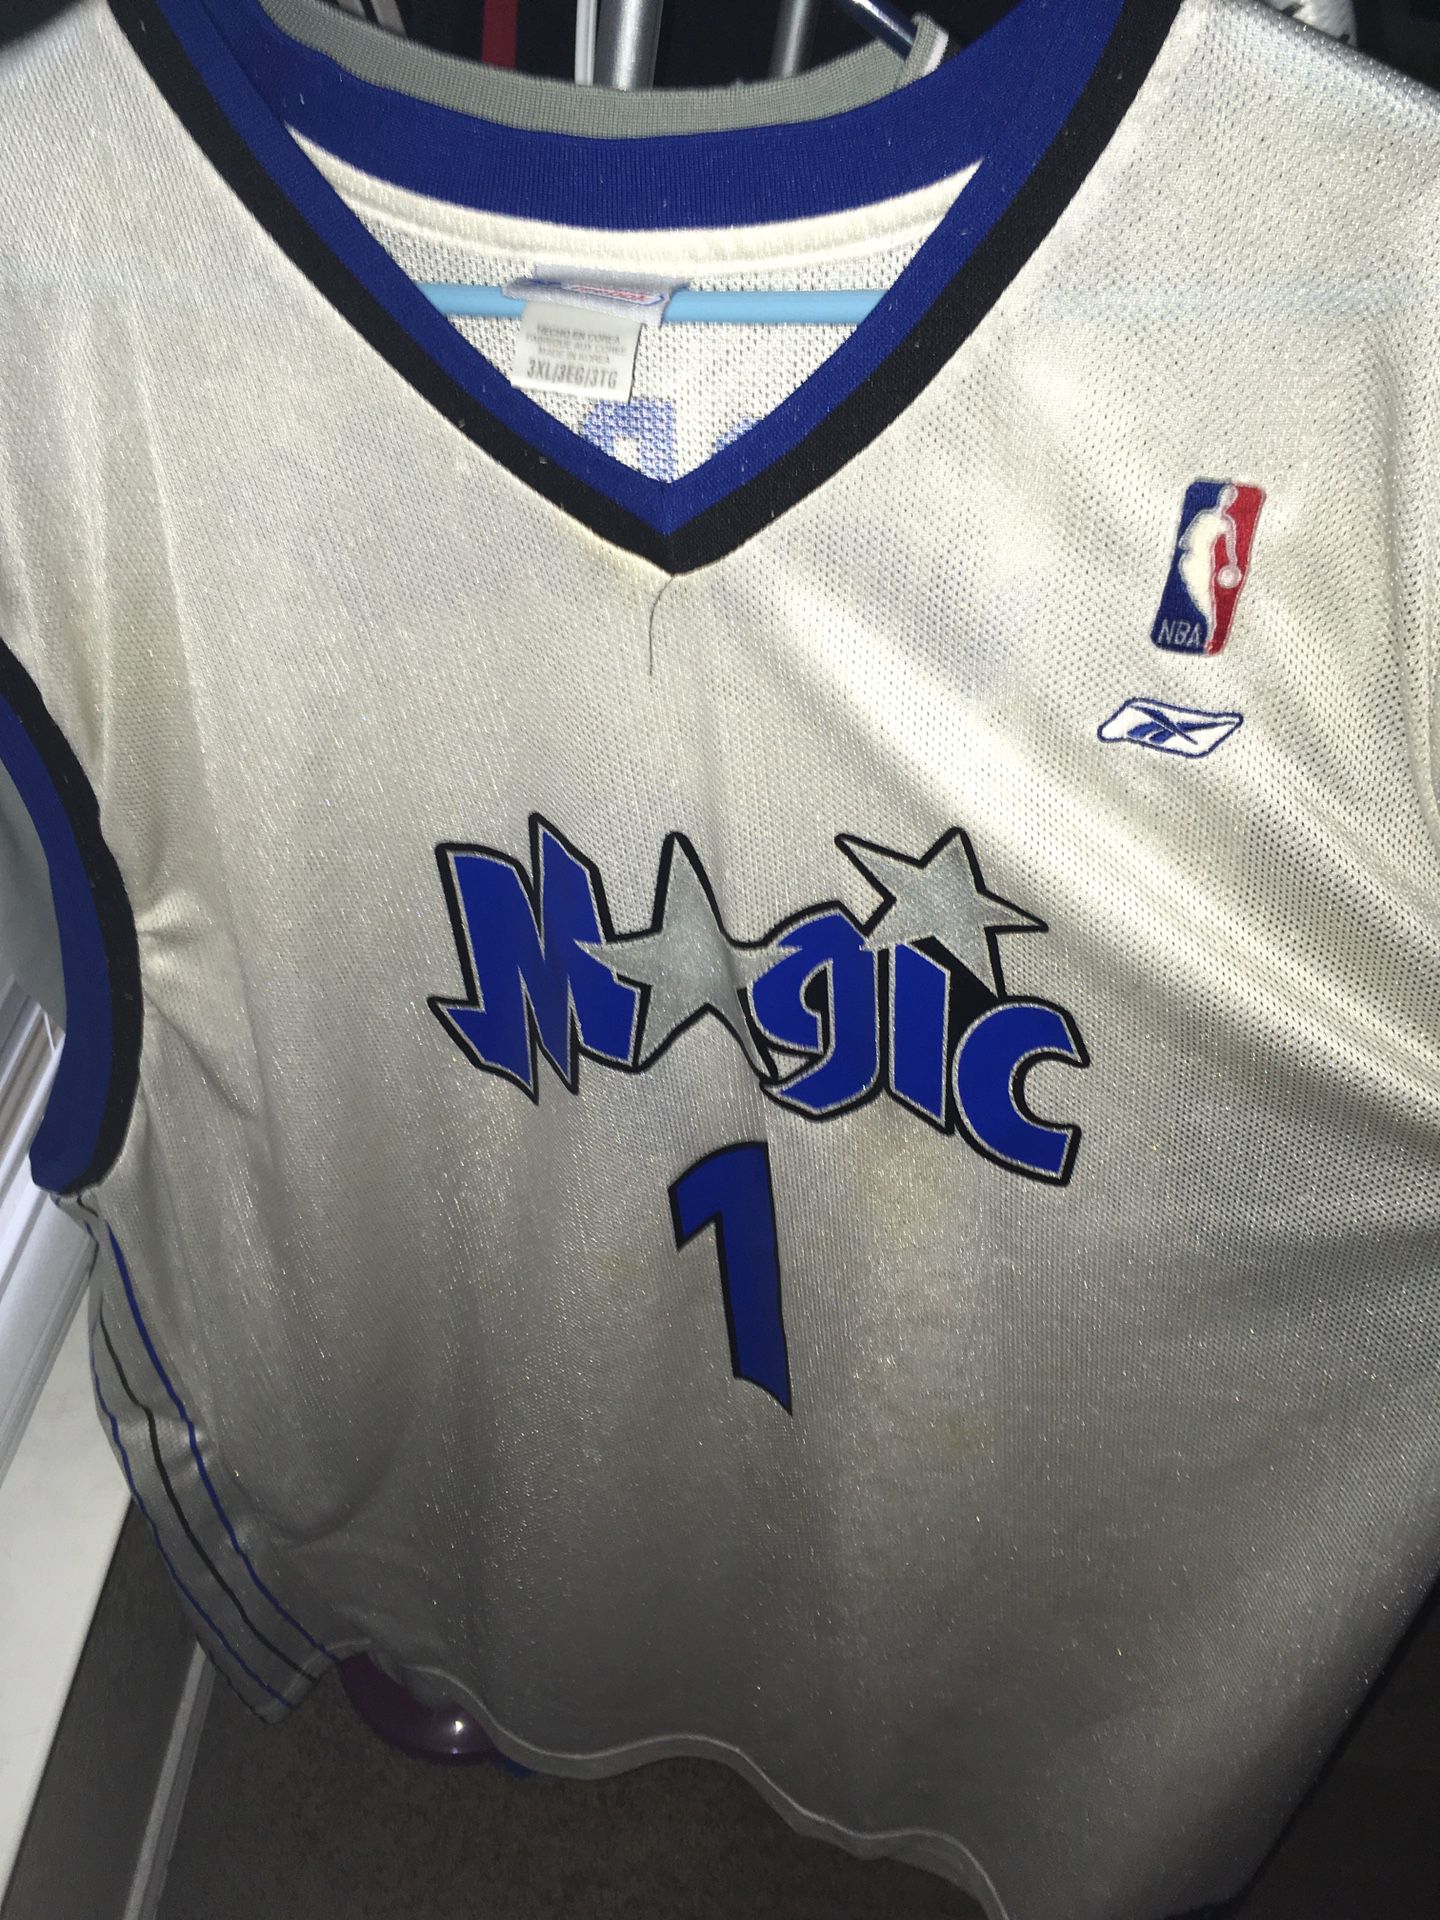 Tracy McGrady jersey for Sale in Charlotte, NC - OfferUp